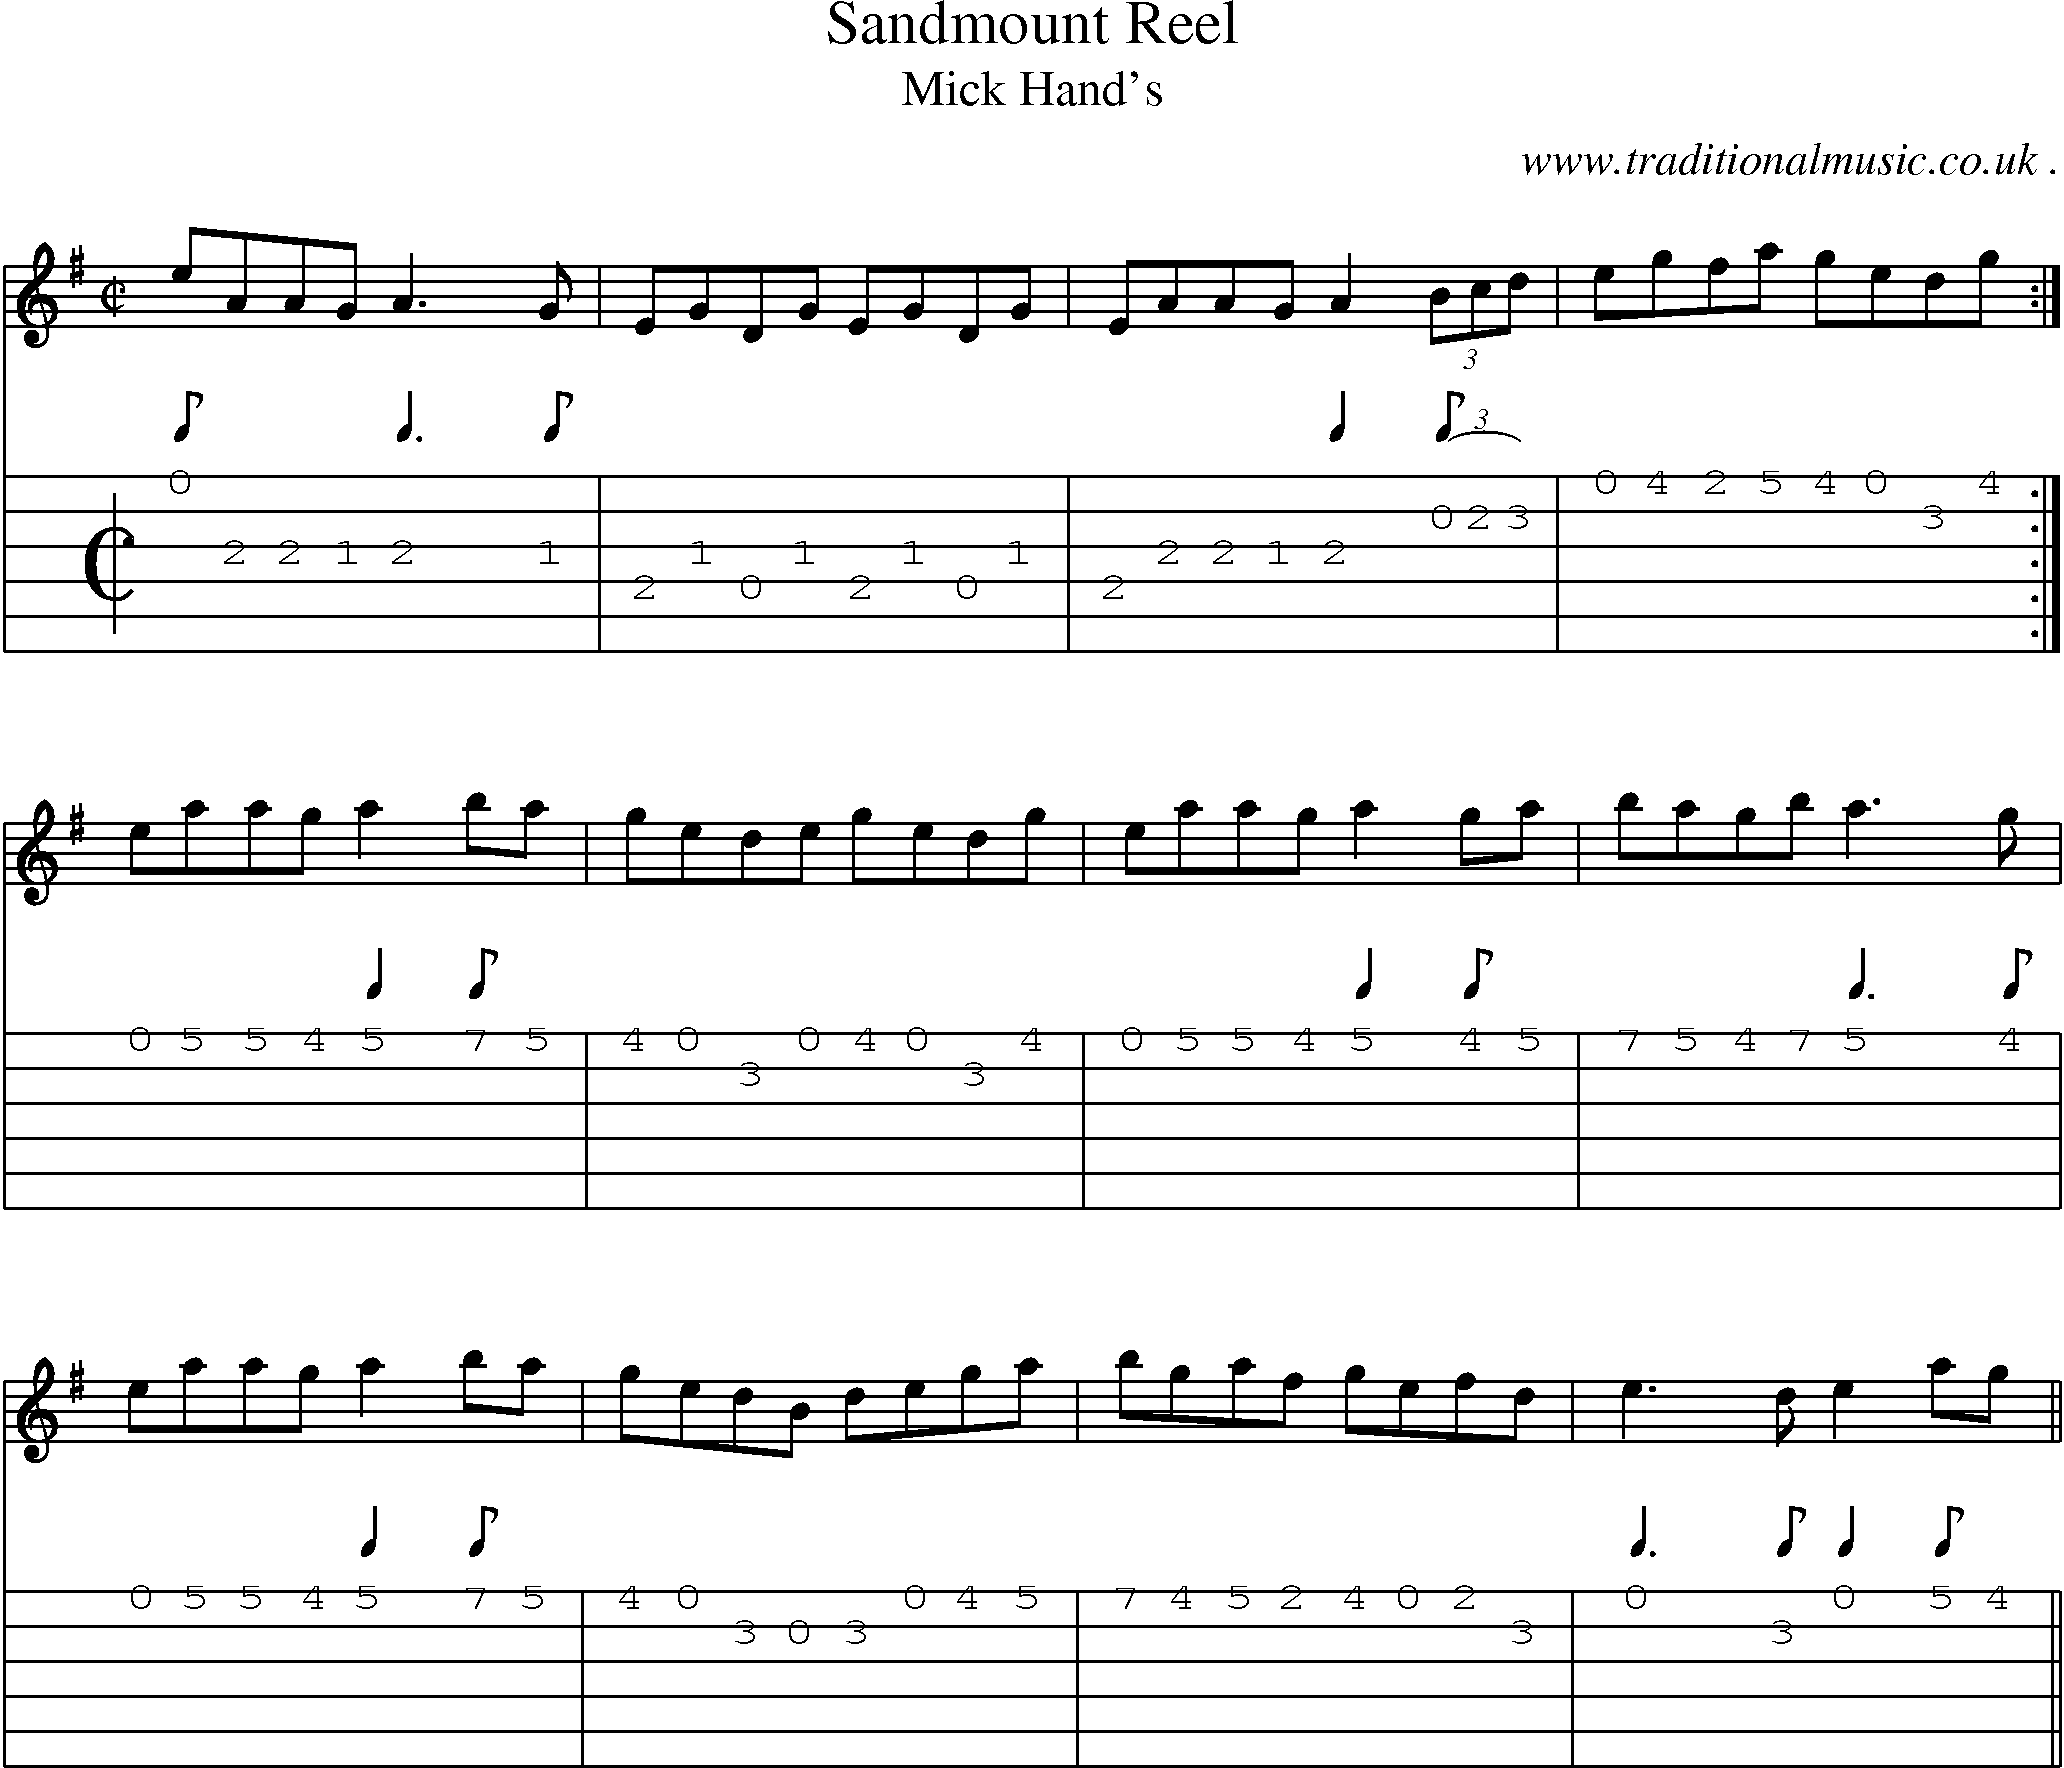 Sheet-Music and Guitar Tabs for Sandmount Reel